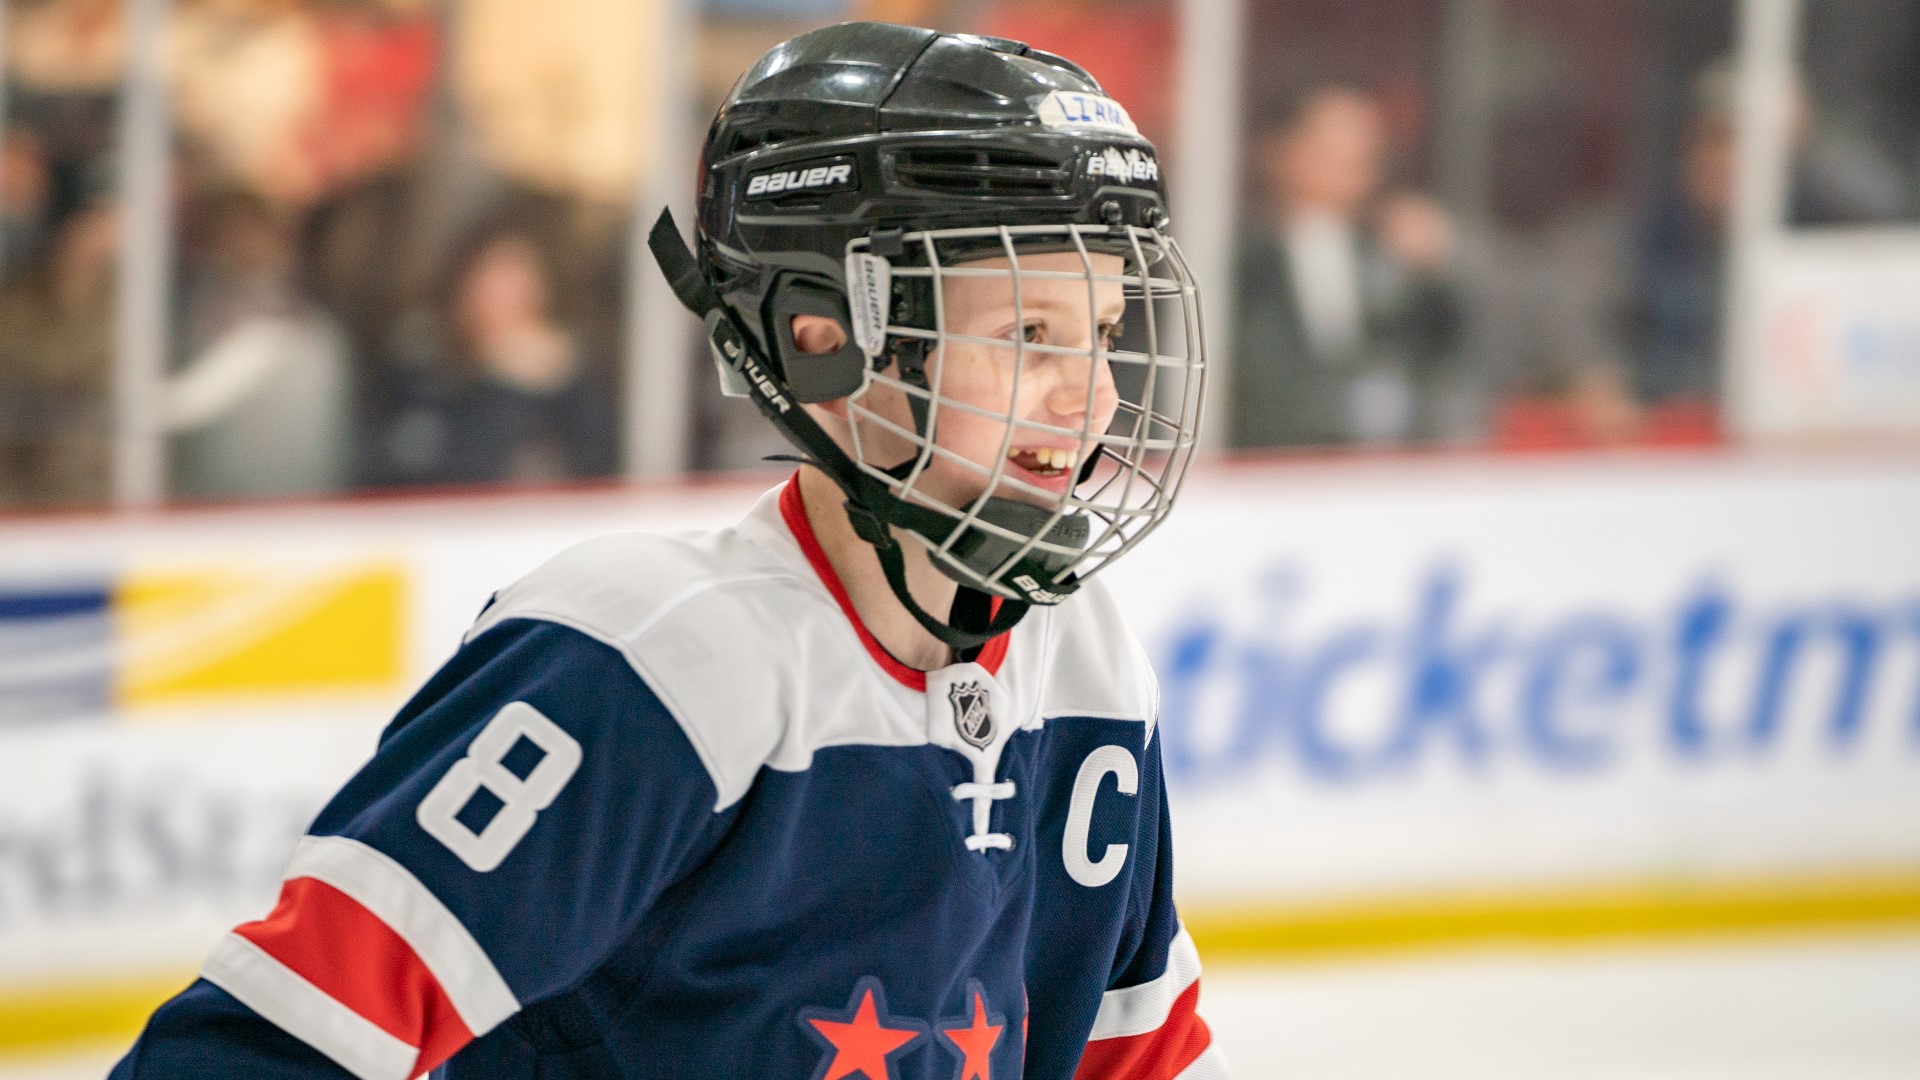 A 12-year-old boy diagnosed with brain cancer got his wish granted Monday to get on the ice with his favorite hockey team – the Washington Capitals.